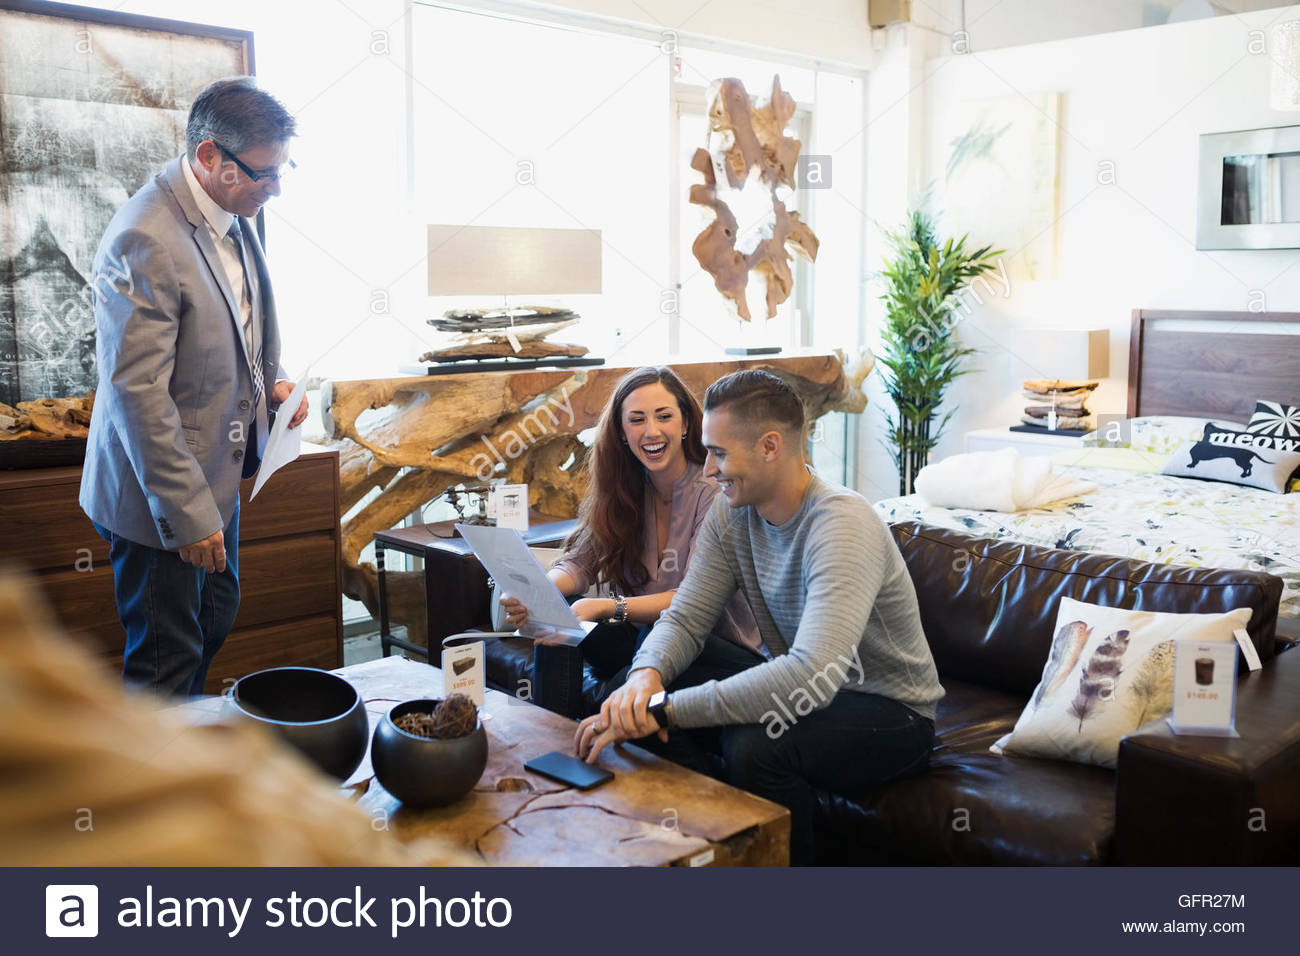 Salesman helping couple in home furnishings store Stock Photo